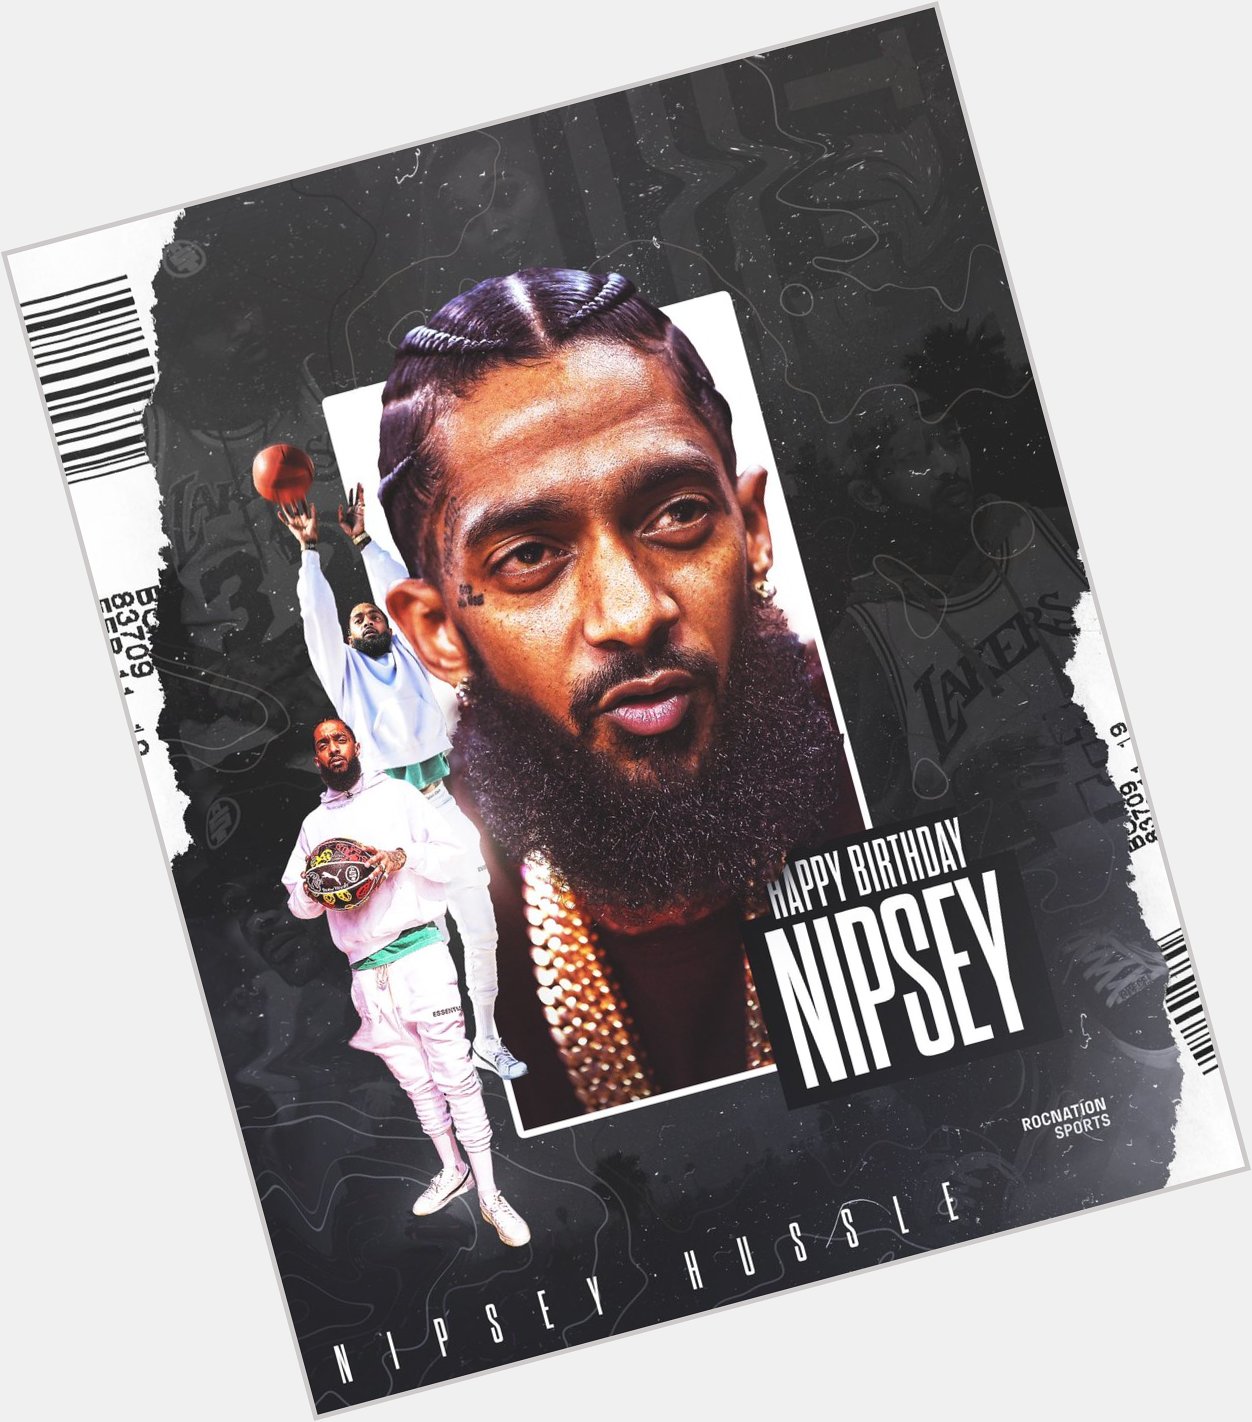 Happy Birthday to the great Nipsey Hussle. Today we celebrate his life and legacy, 